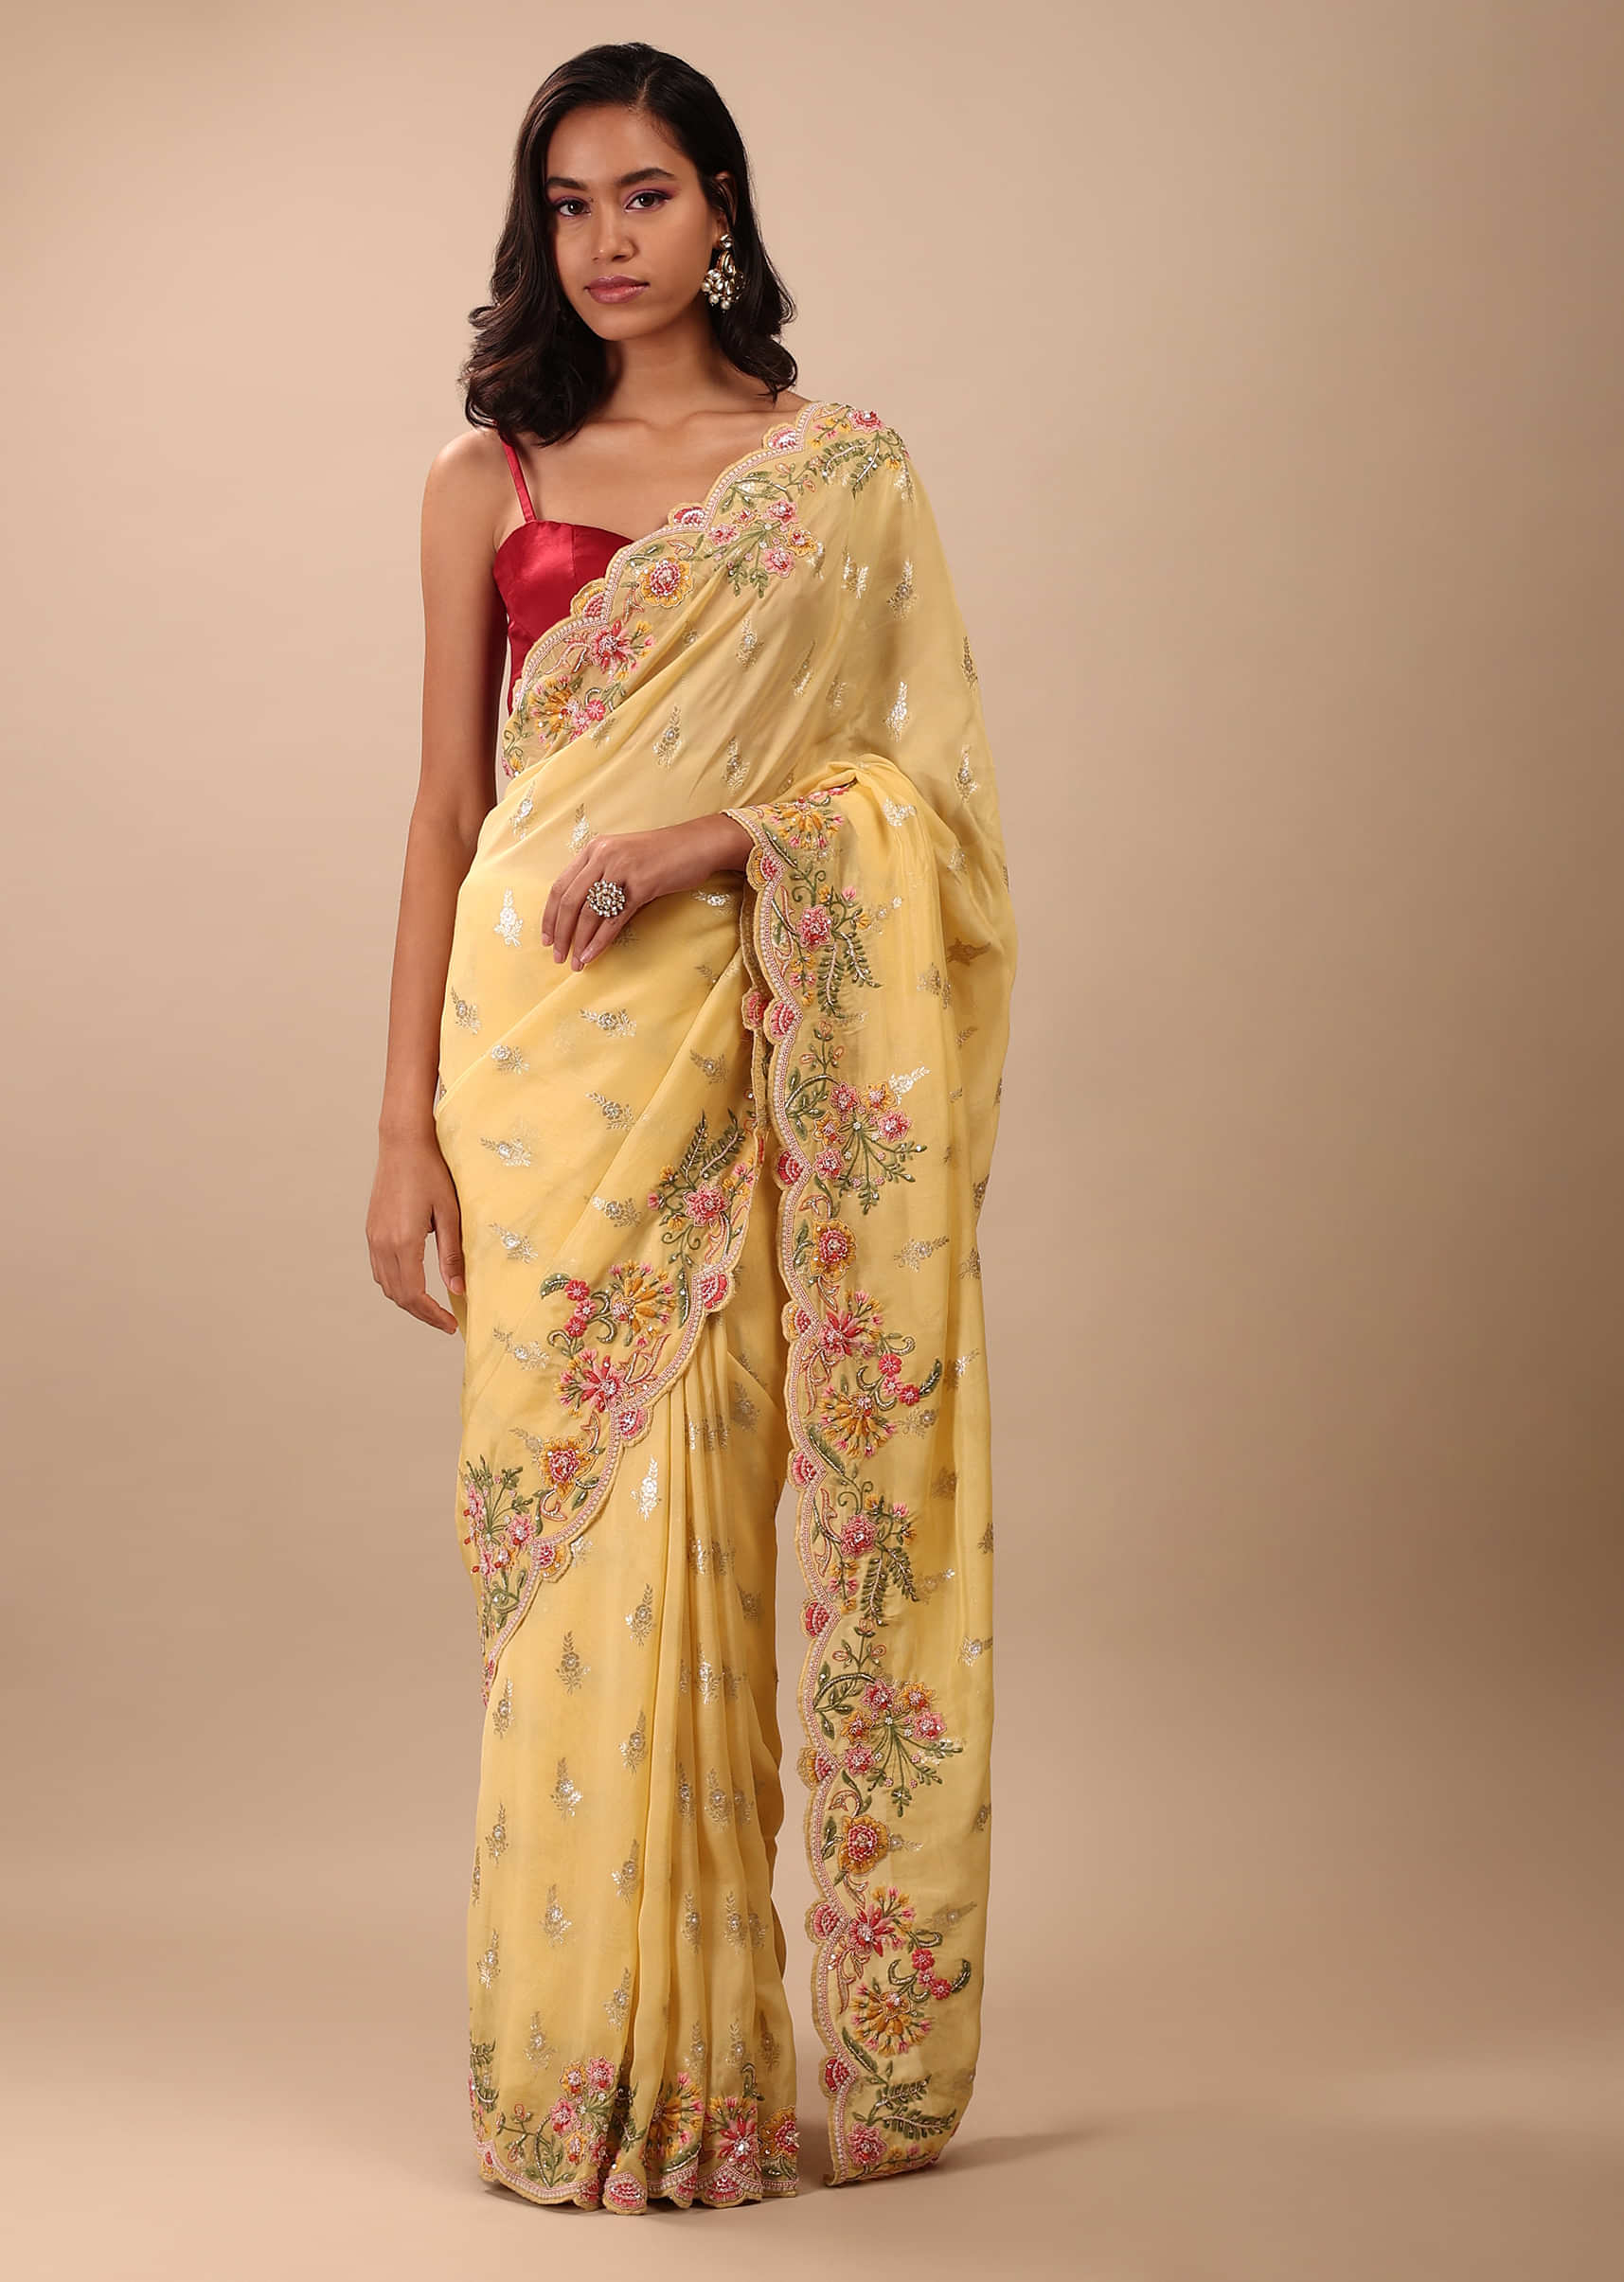 Canary Yellow Organza Saree With Brocade Buttis And Floral Embroidery In Zardosi